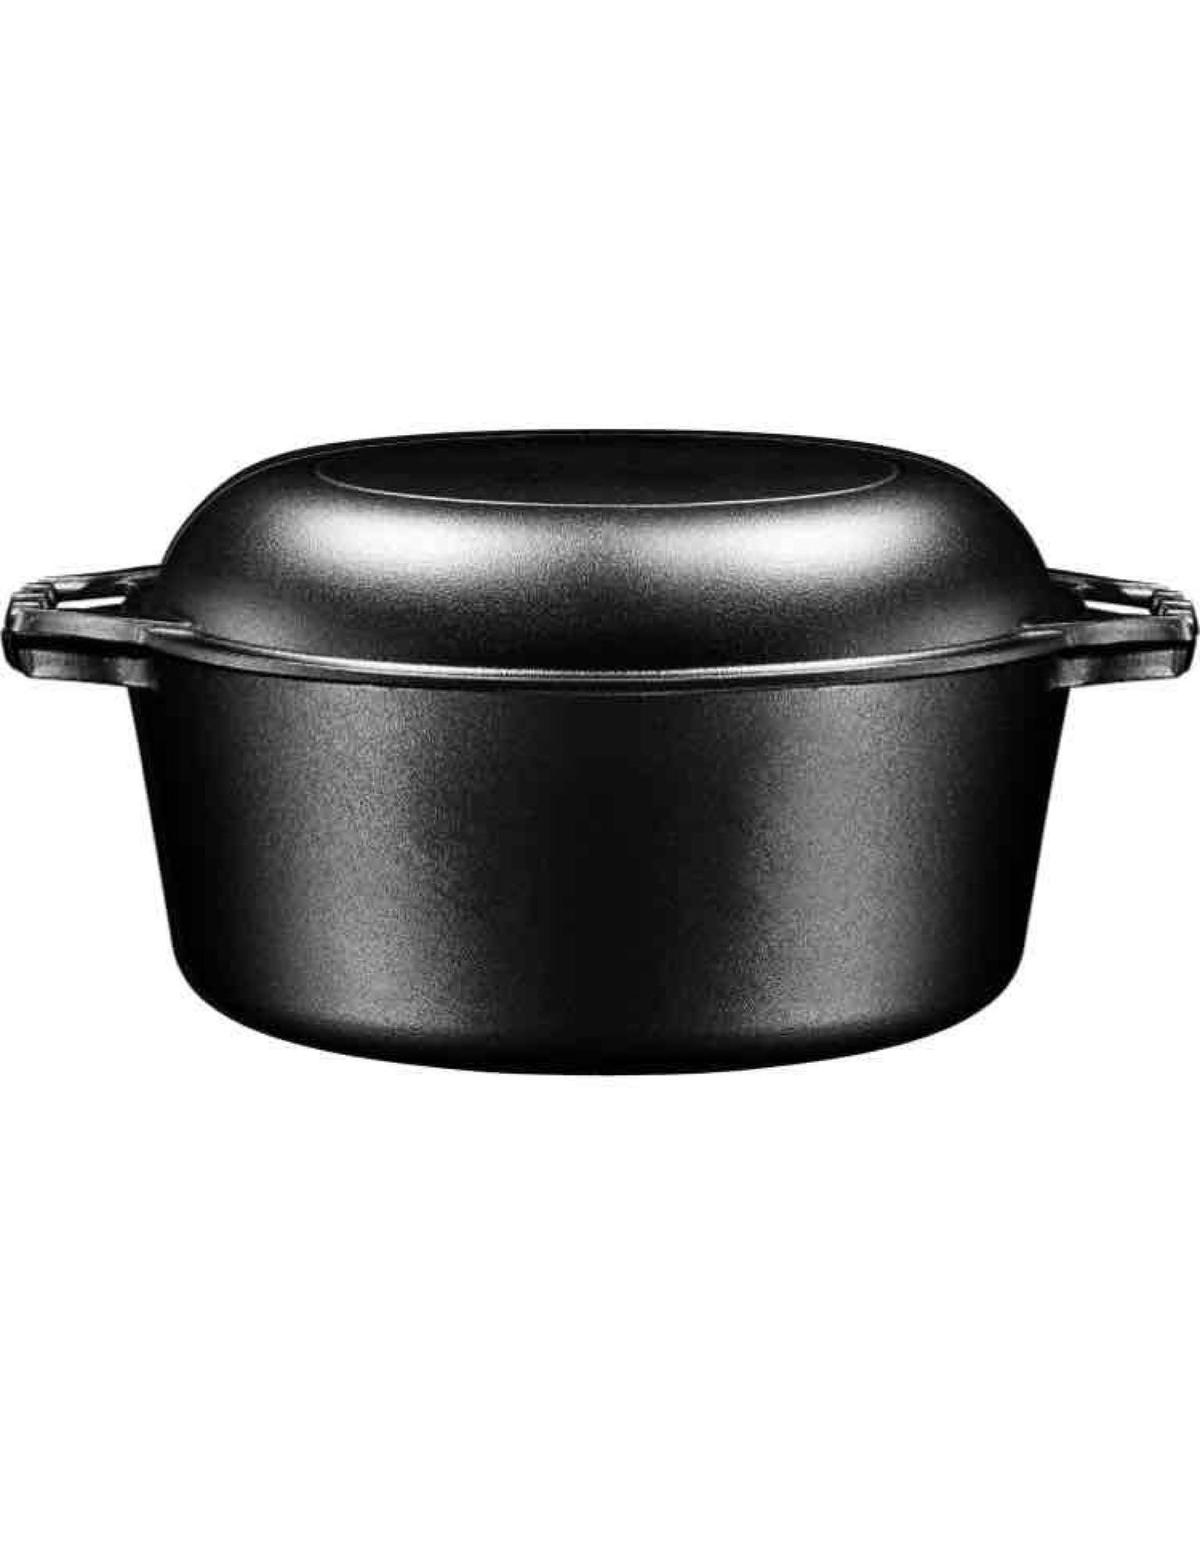 Bruntmor Pre-Seasoned Cast Iron Dutch Oven and Skillet Lid - 7 Quart All-in-One Casserole and